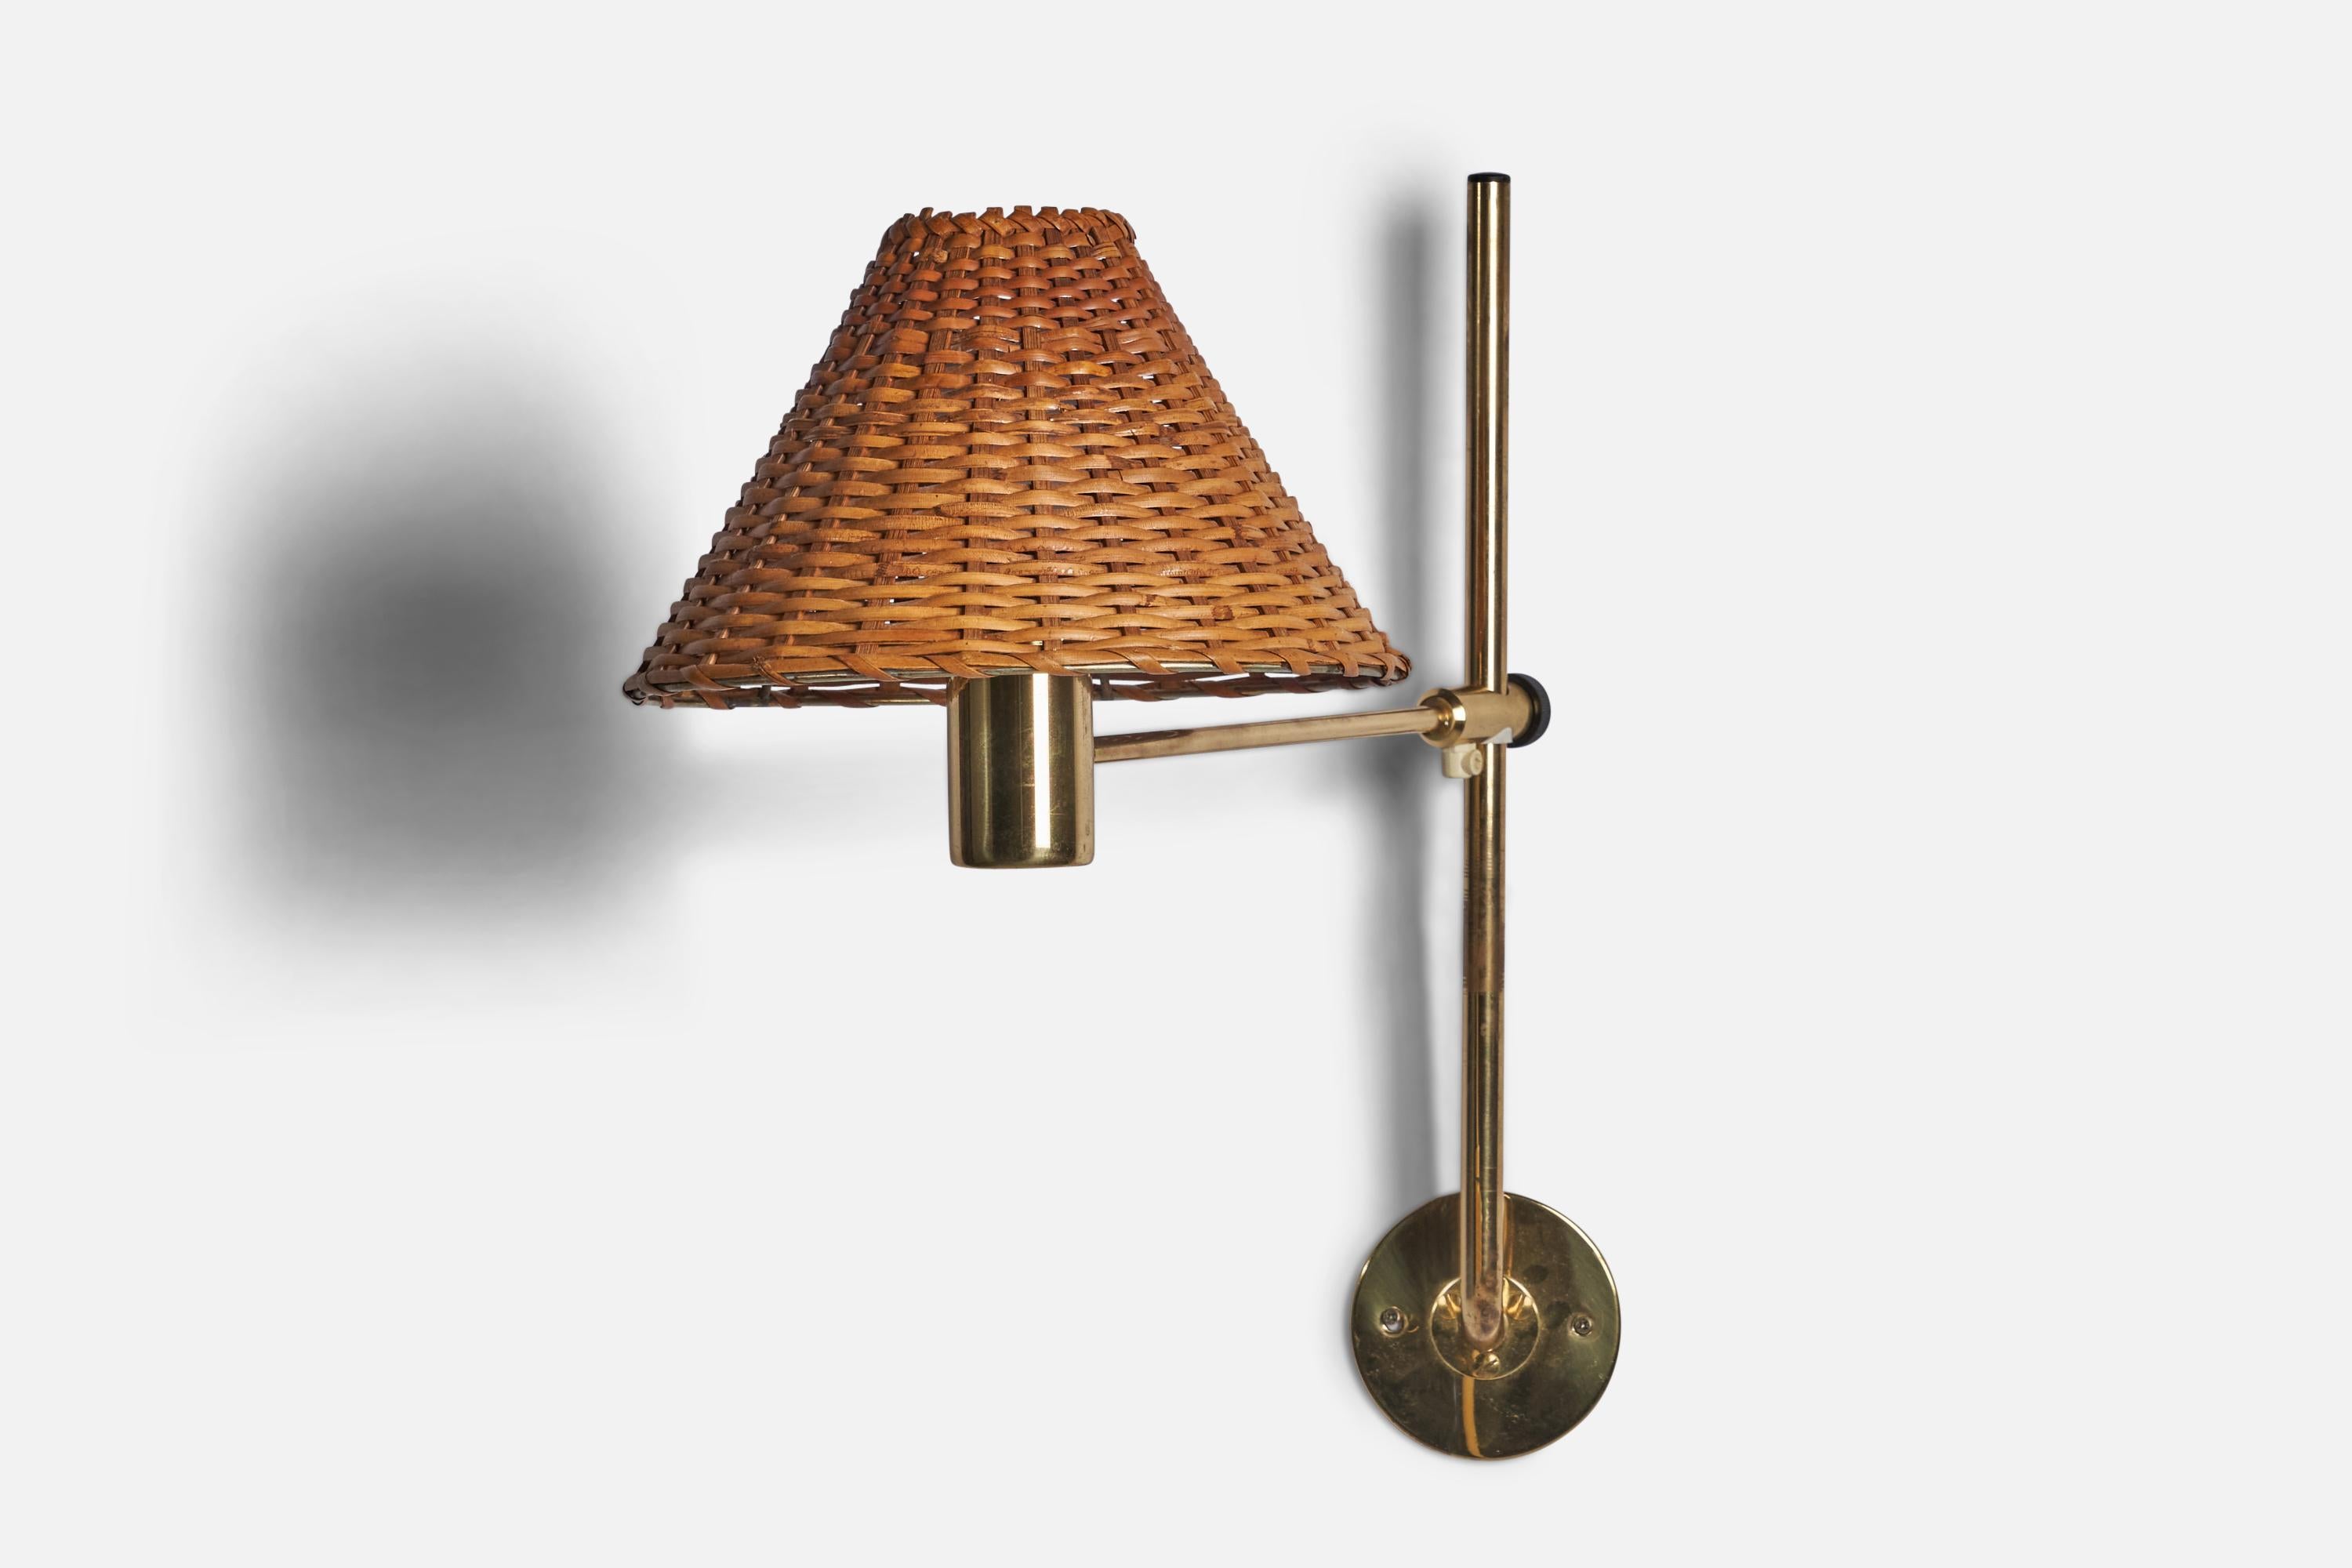 An adjustable brass and rattan wall light designed and produced by Hans-Agne Jakobsson, Sweden, 1960s.

Overall Dimensions (inches): 22” H x 10” W x 17” D
Back Plate Dimensions (inches): 4” Diameter
Bulb Specifications: E-26 Bulb
Number of Sockets: